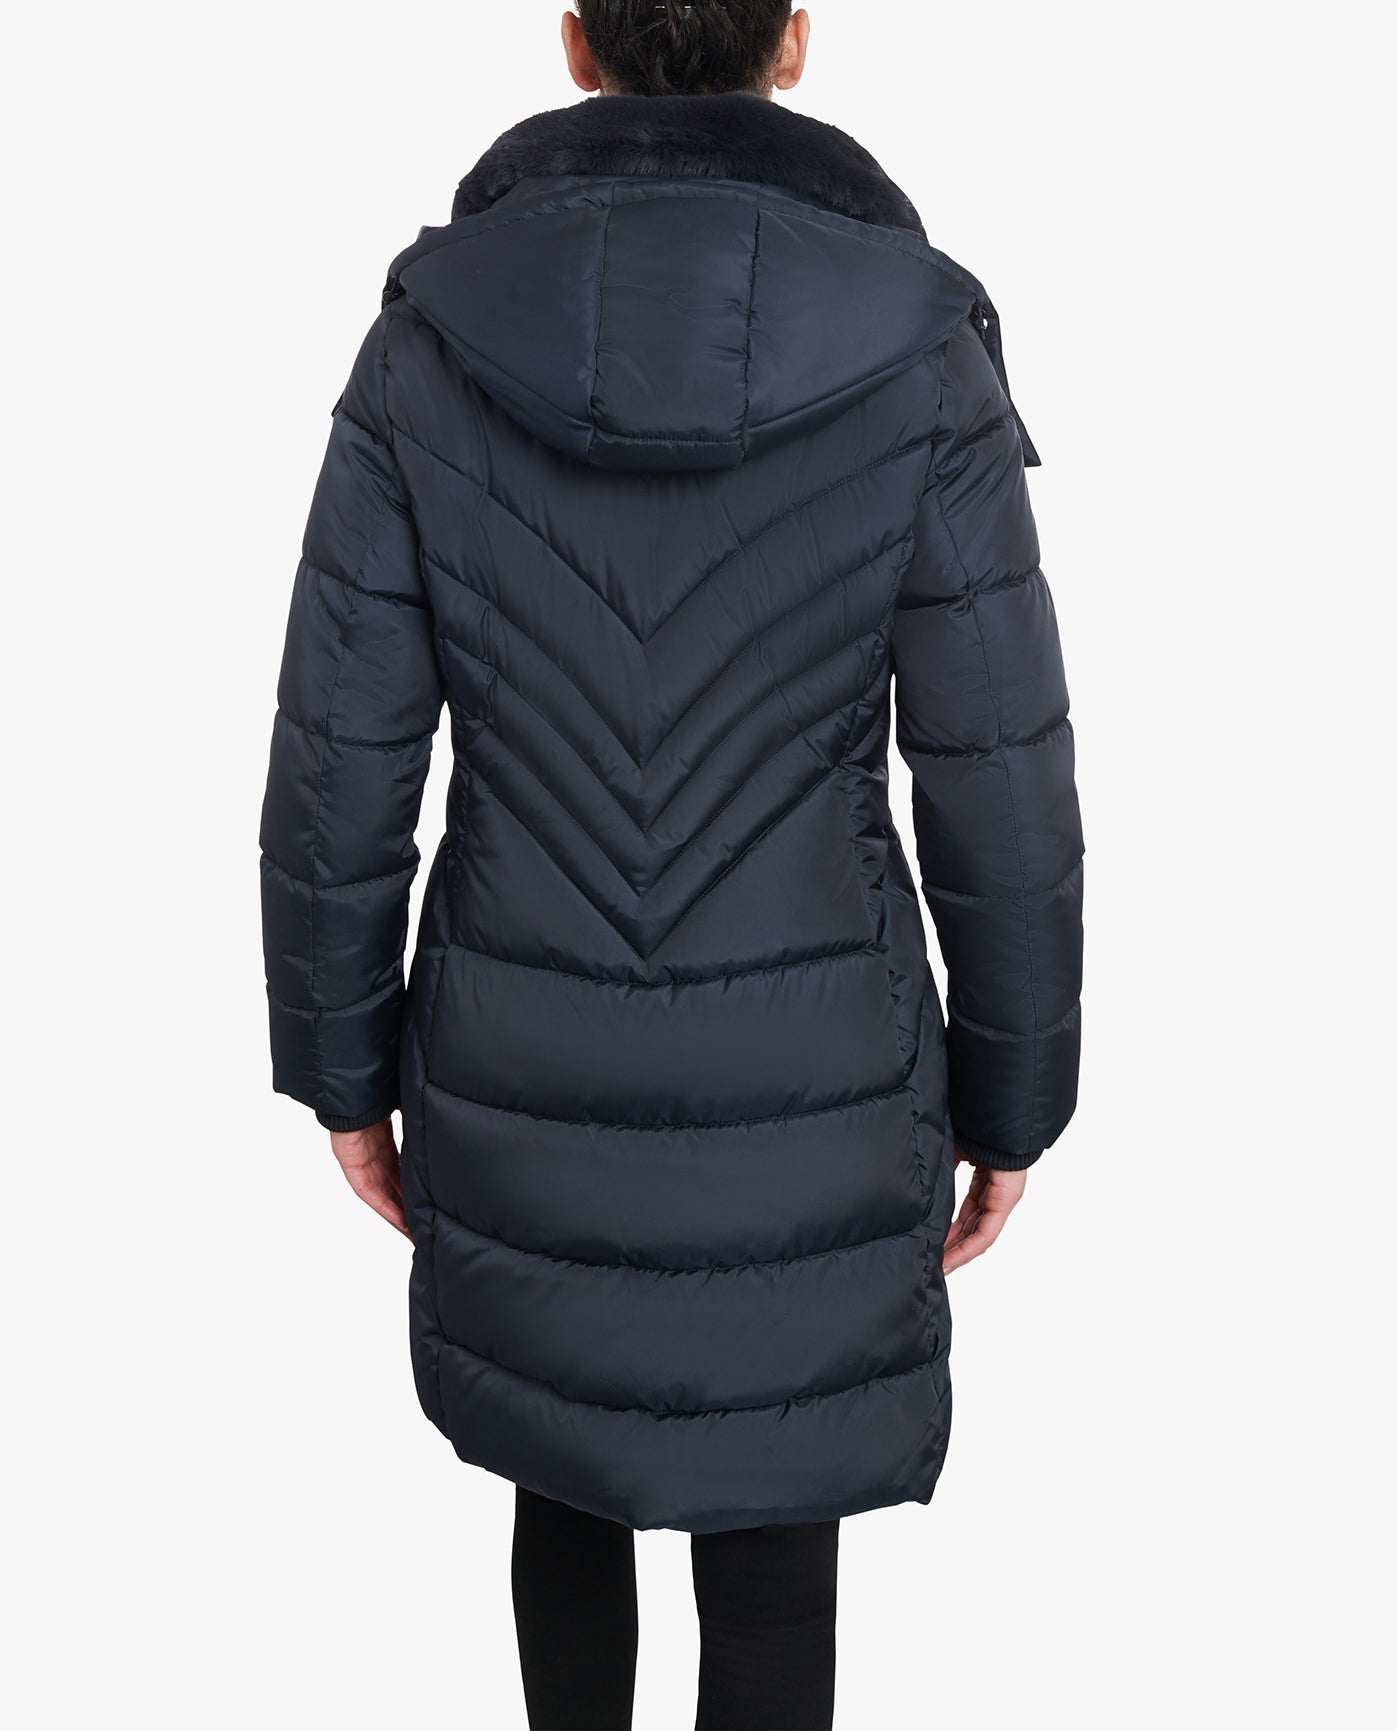 BACK VIEW OF PLUS SIZE ZIP-FRONT HOODED HEAVY WEIGHT PUFFER JACKET WITH BUTTON-OFF FUR COLLAR | NAVY